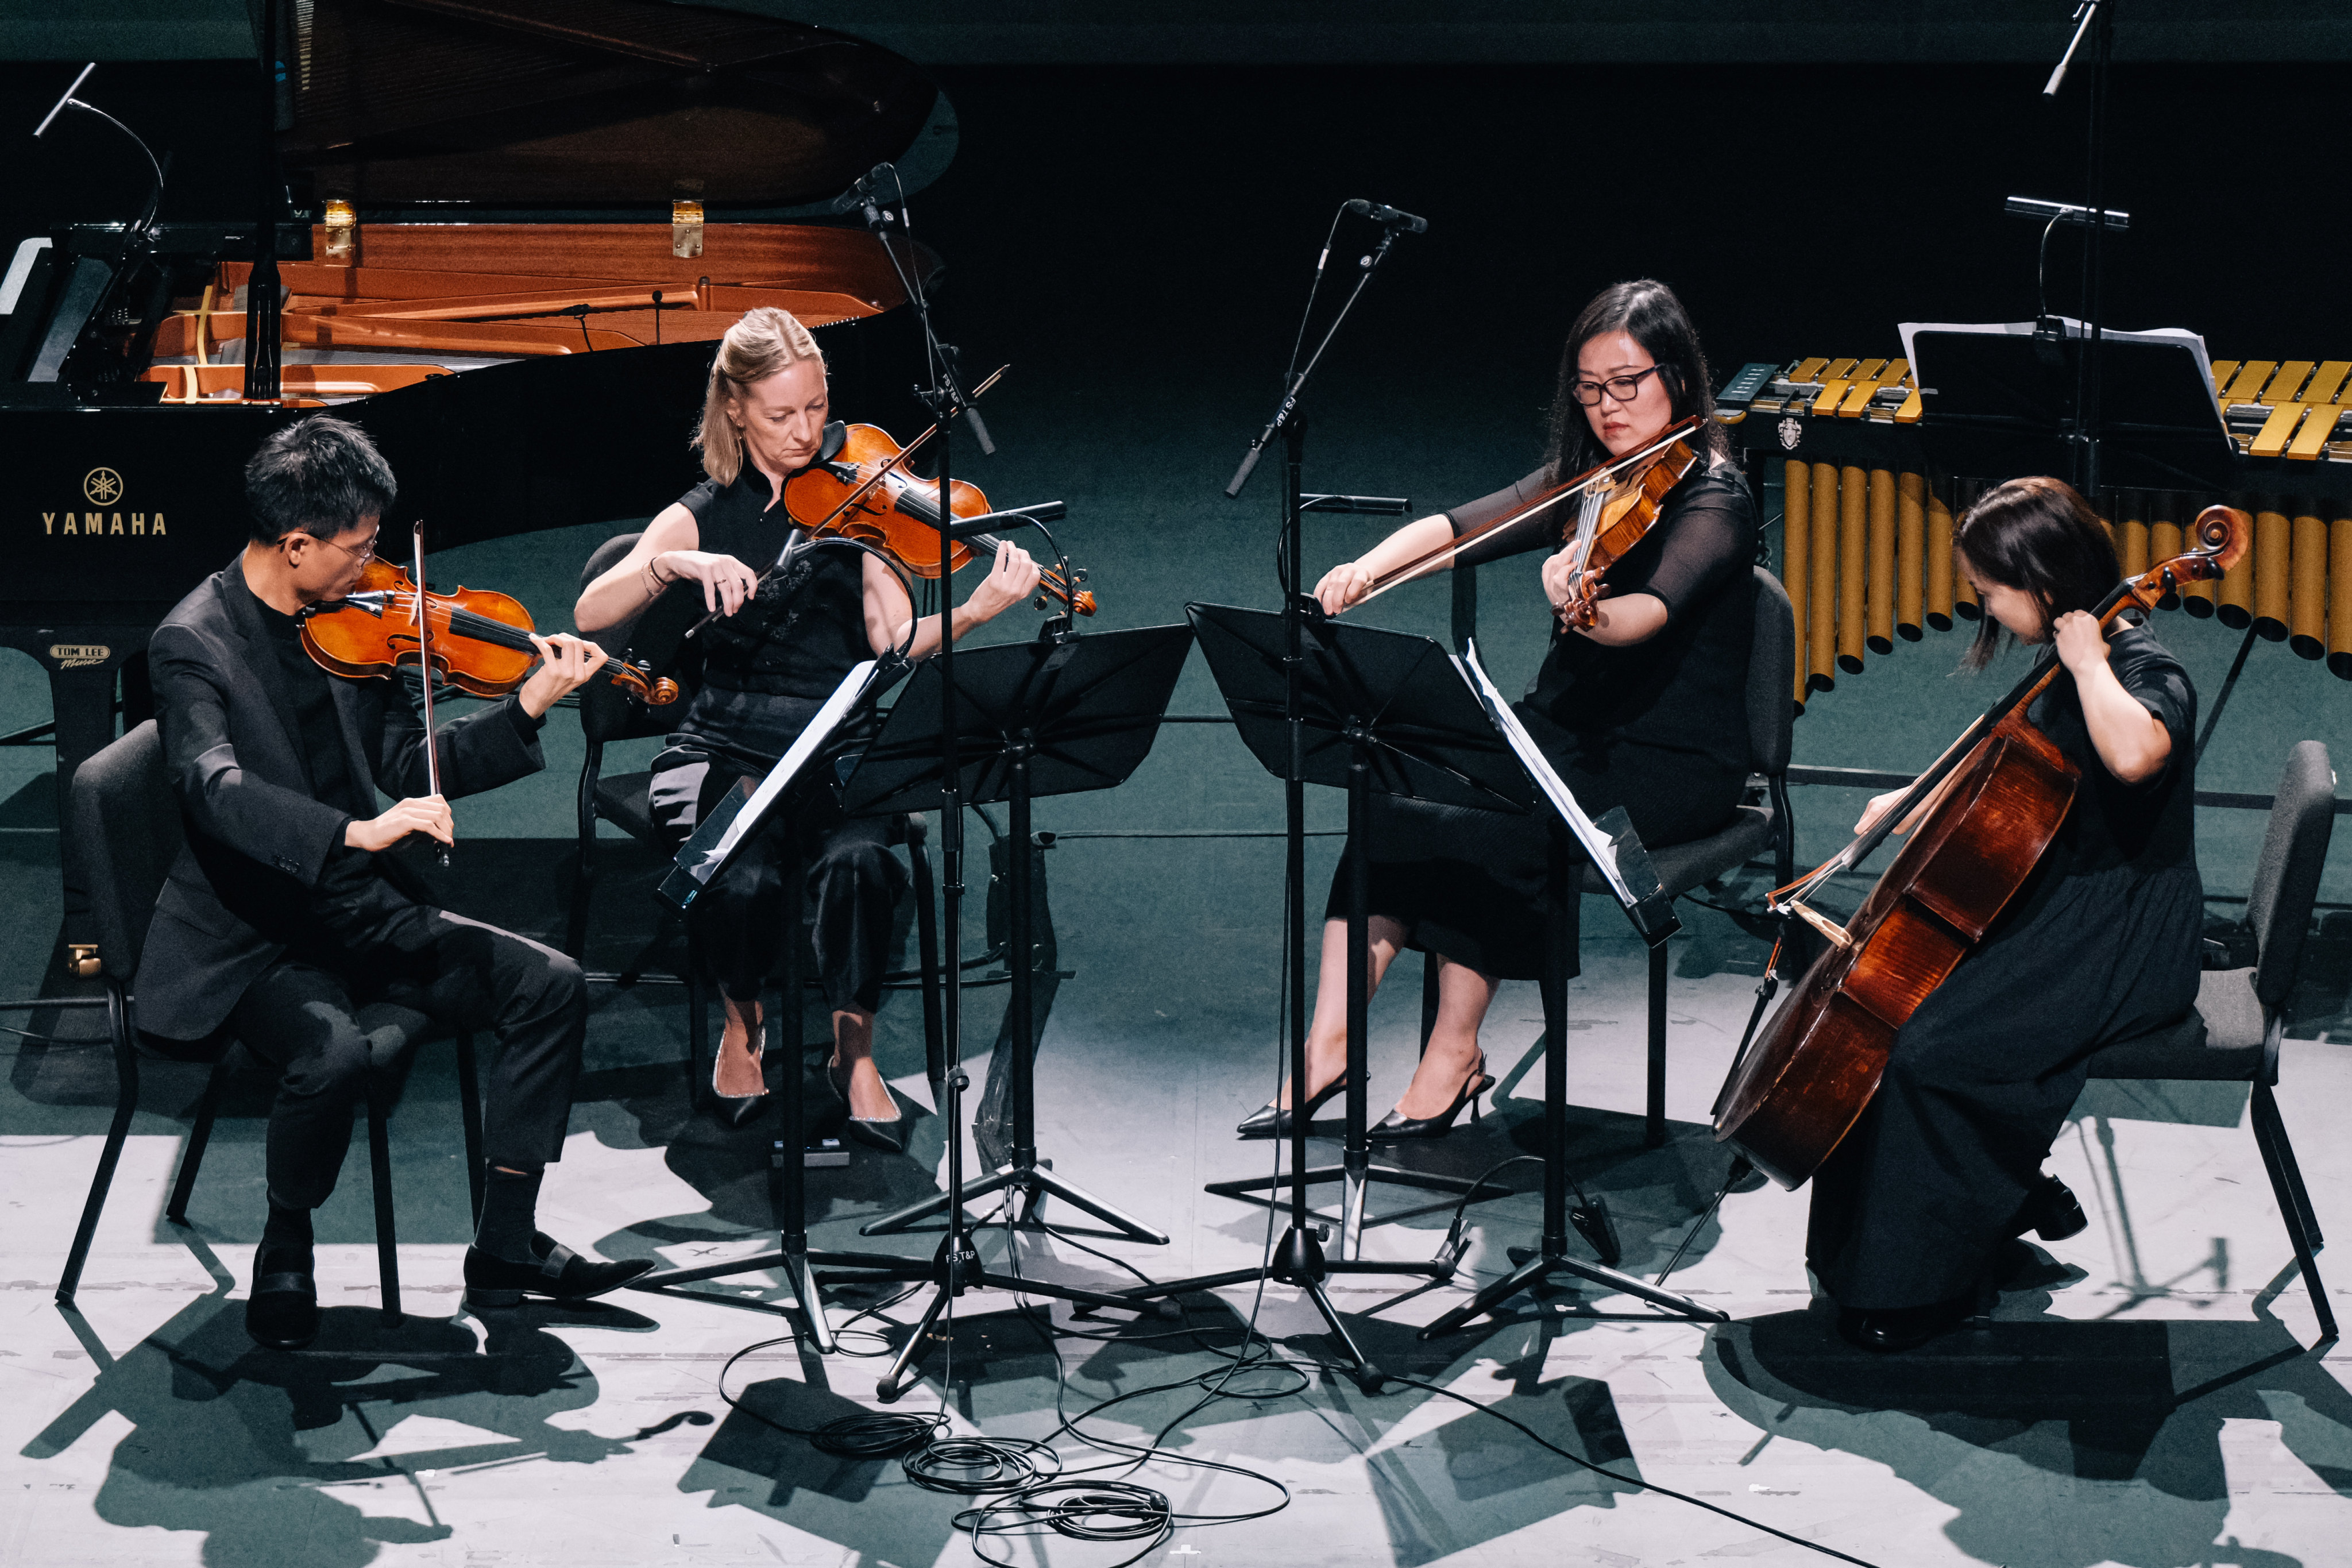 From left to right, Li Chi and Katrina Rafferty on the violin, Zhang Shuying on the viola and cellist Song Tae-mi Song performing in “The Wind with a Voice”. Photo: Ka Lam/HK Phil